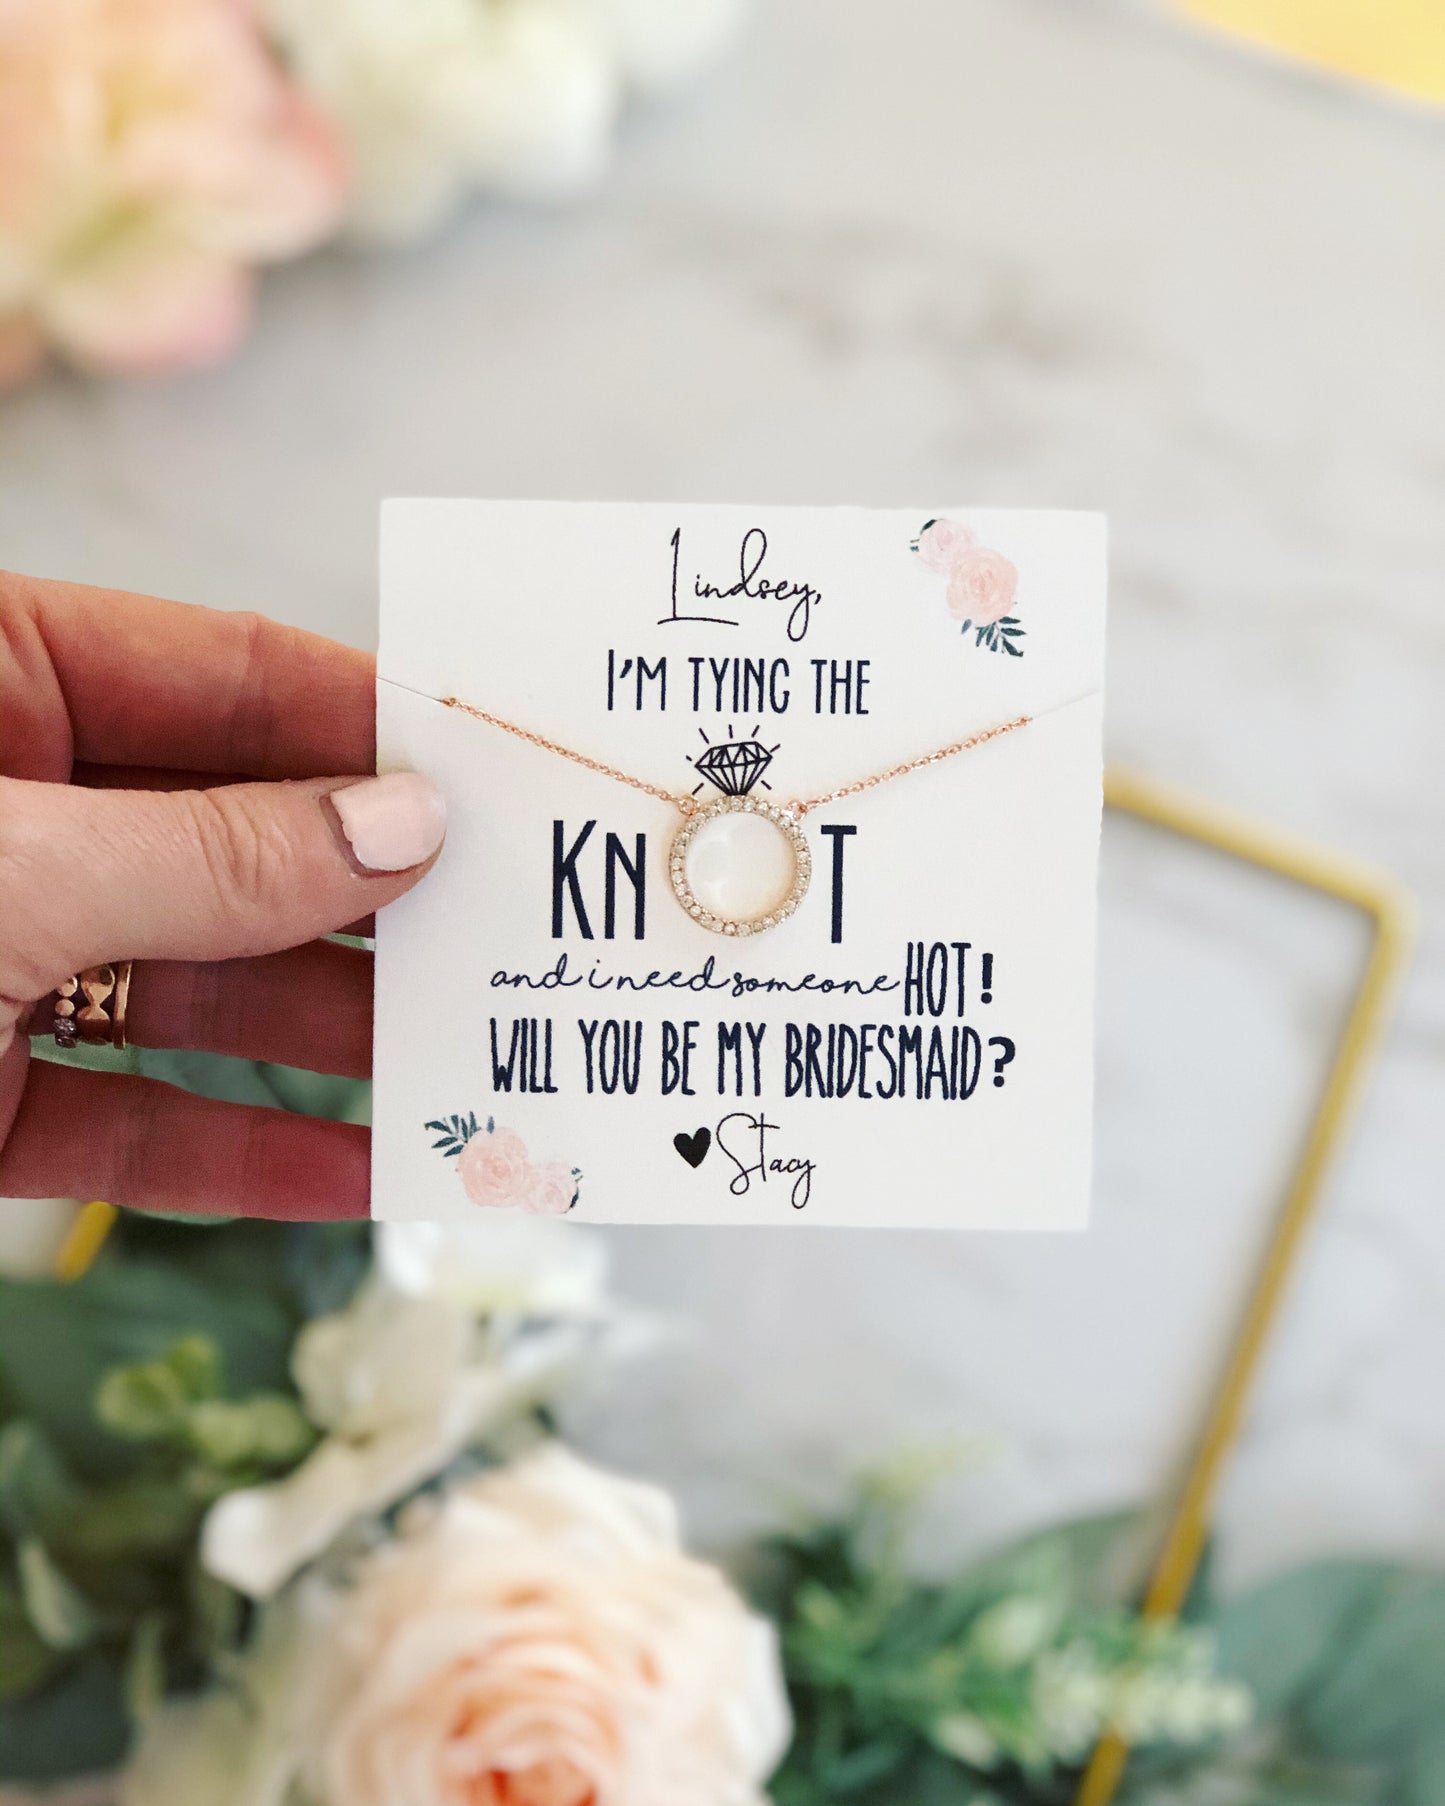 I'm Tying the KNOT Circle Pendant Necklace